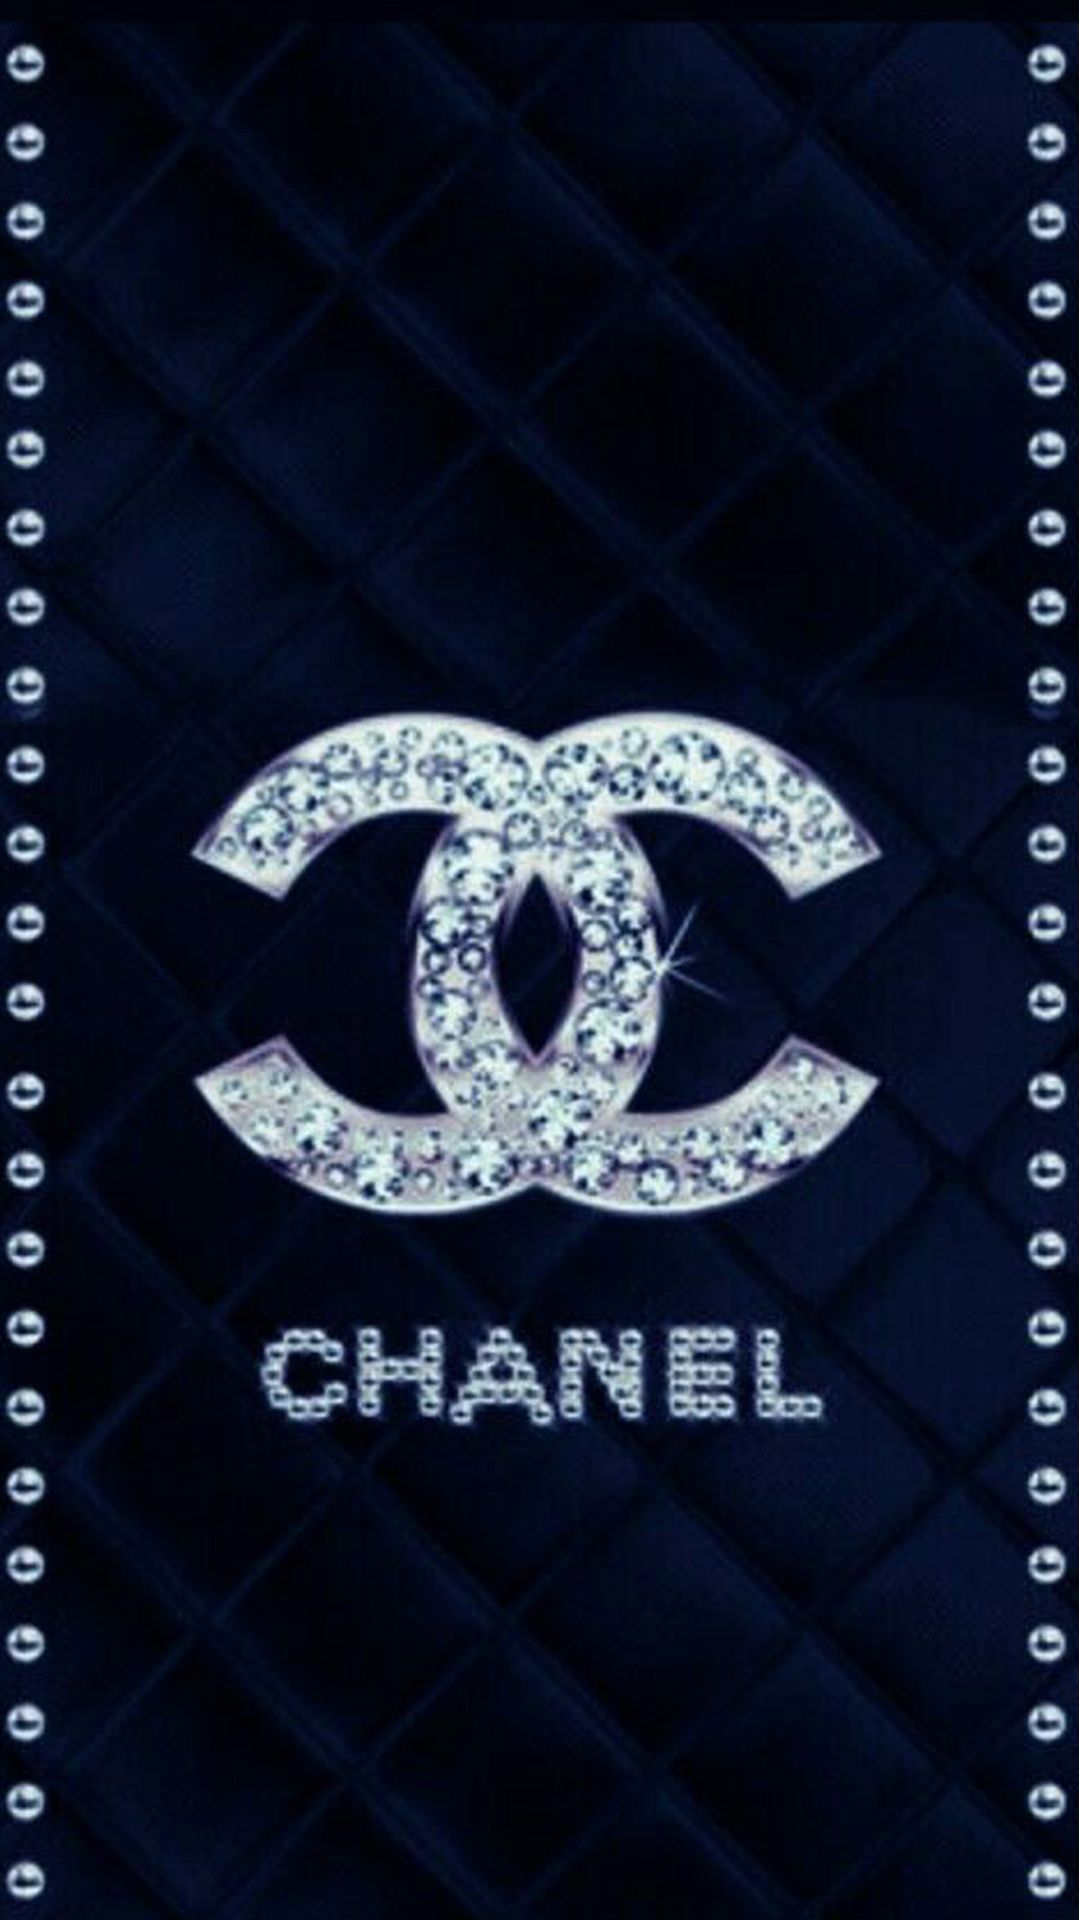 Chanel Girly Wallpapers